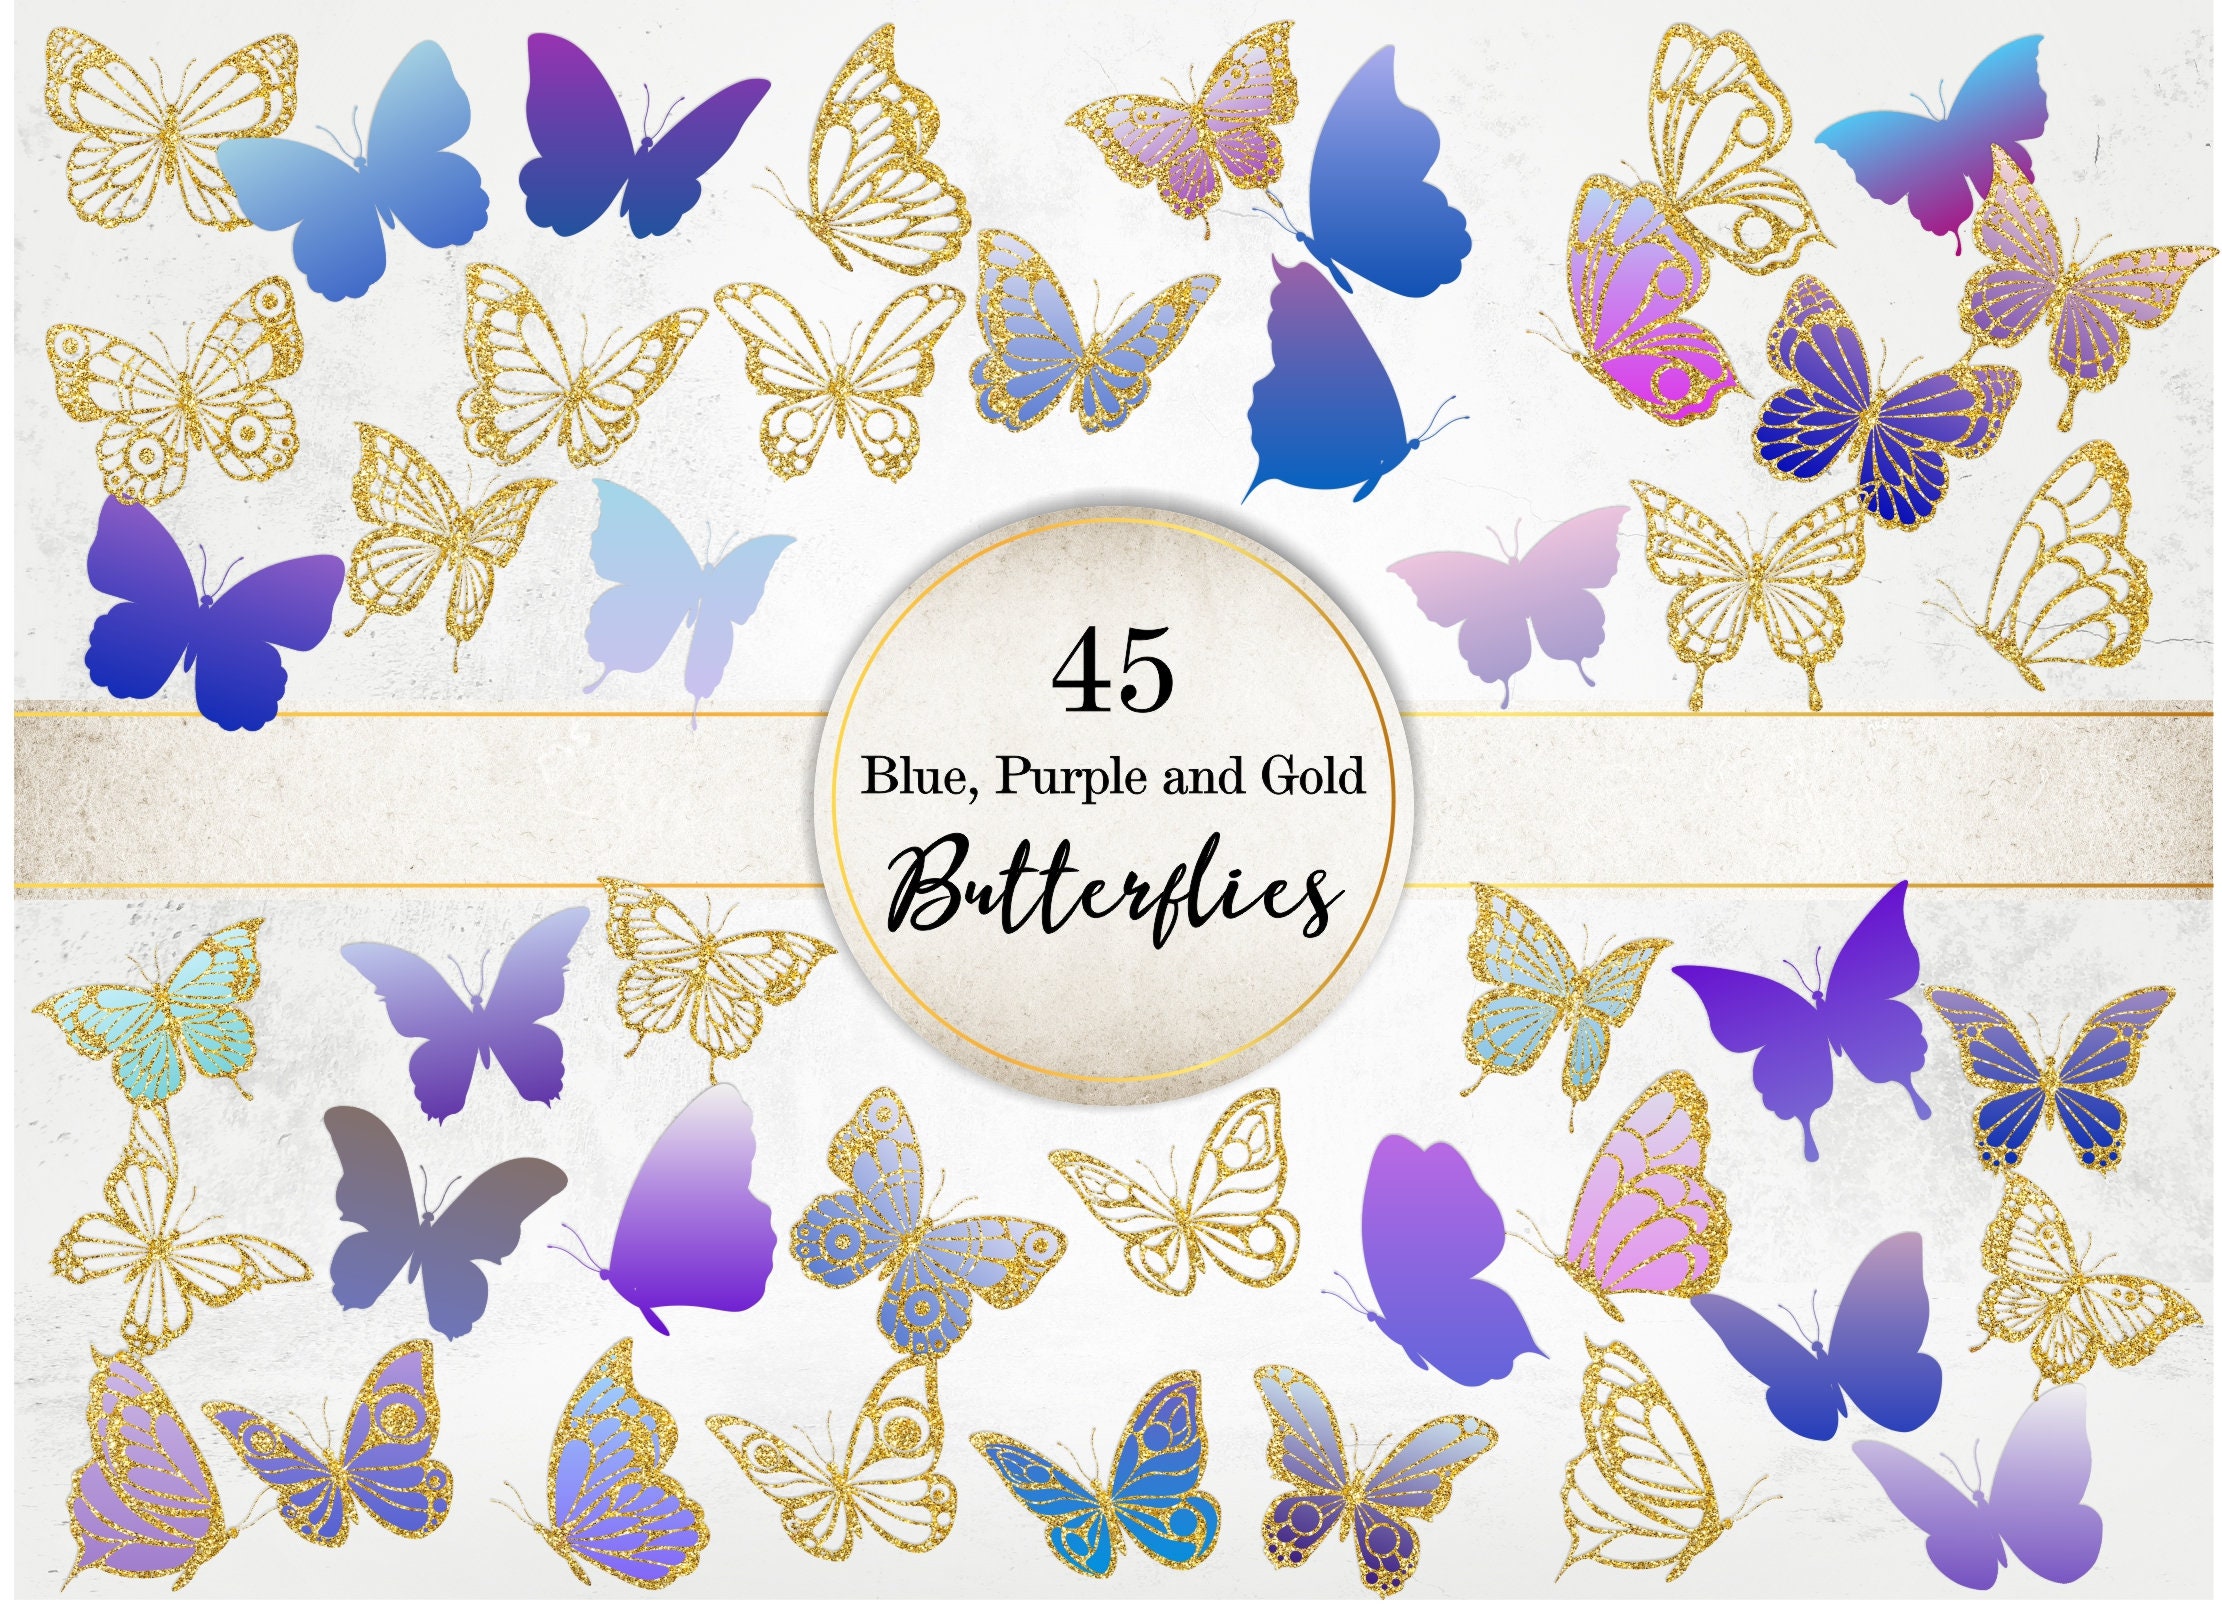 Silver and Gold Glitter Butterflies Images Pack, Lace Butterflies Clipart,  Silver and Gold Butterfly PNG Image Bundle, Sparkling Butterfly -   Norway